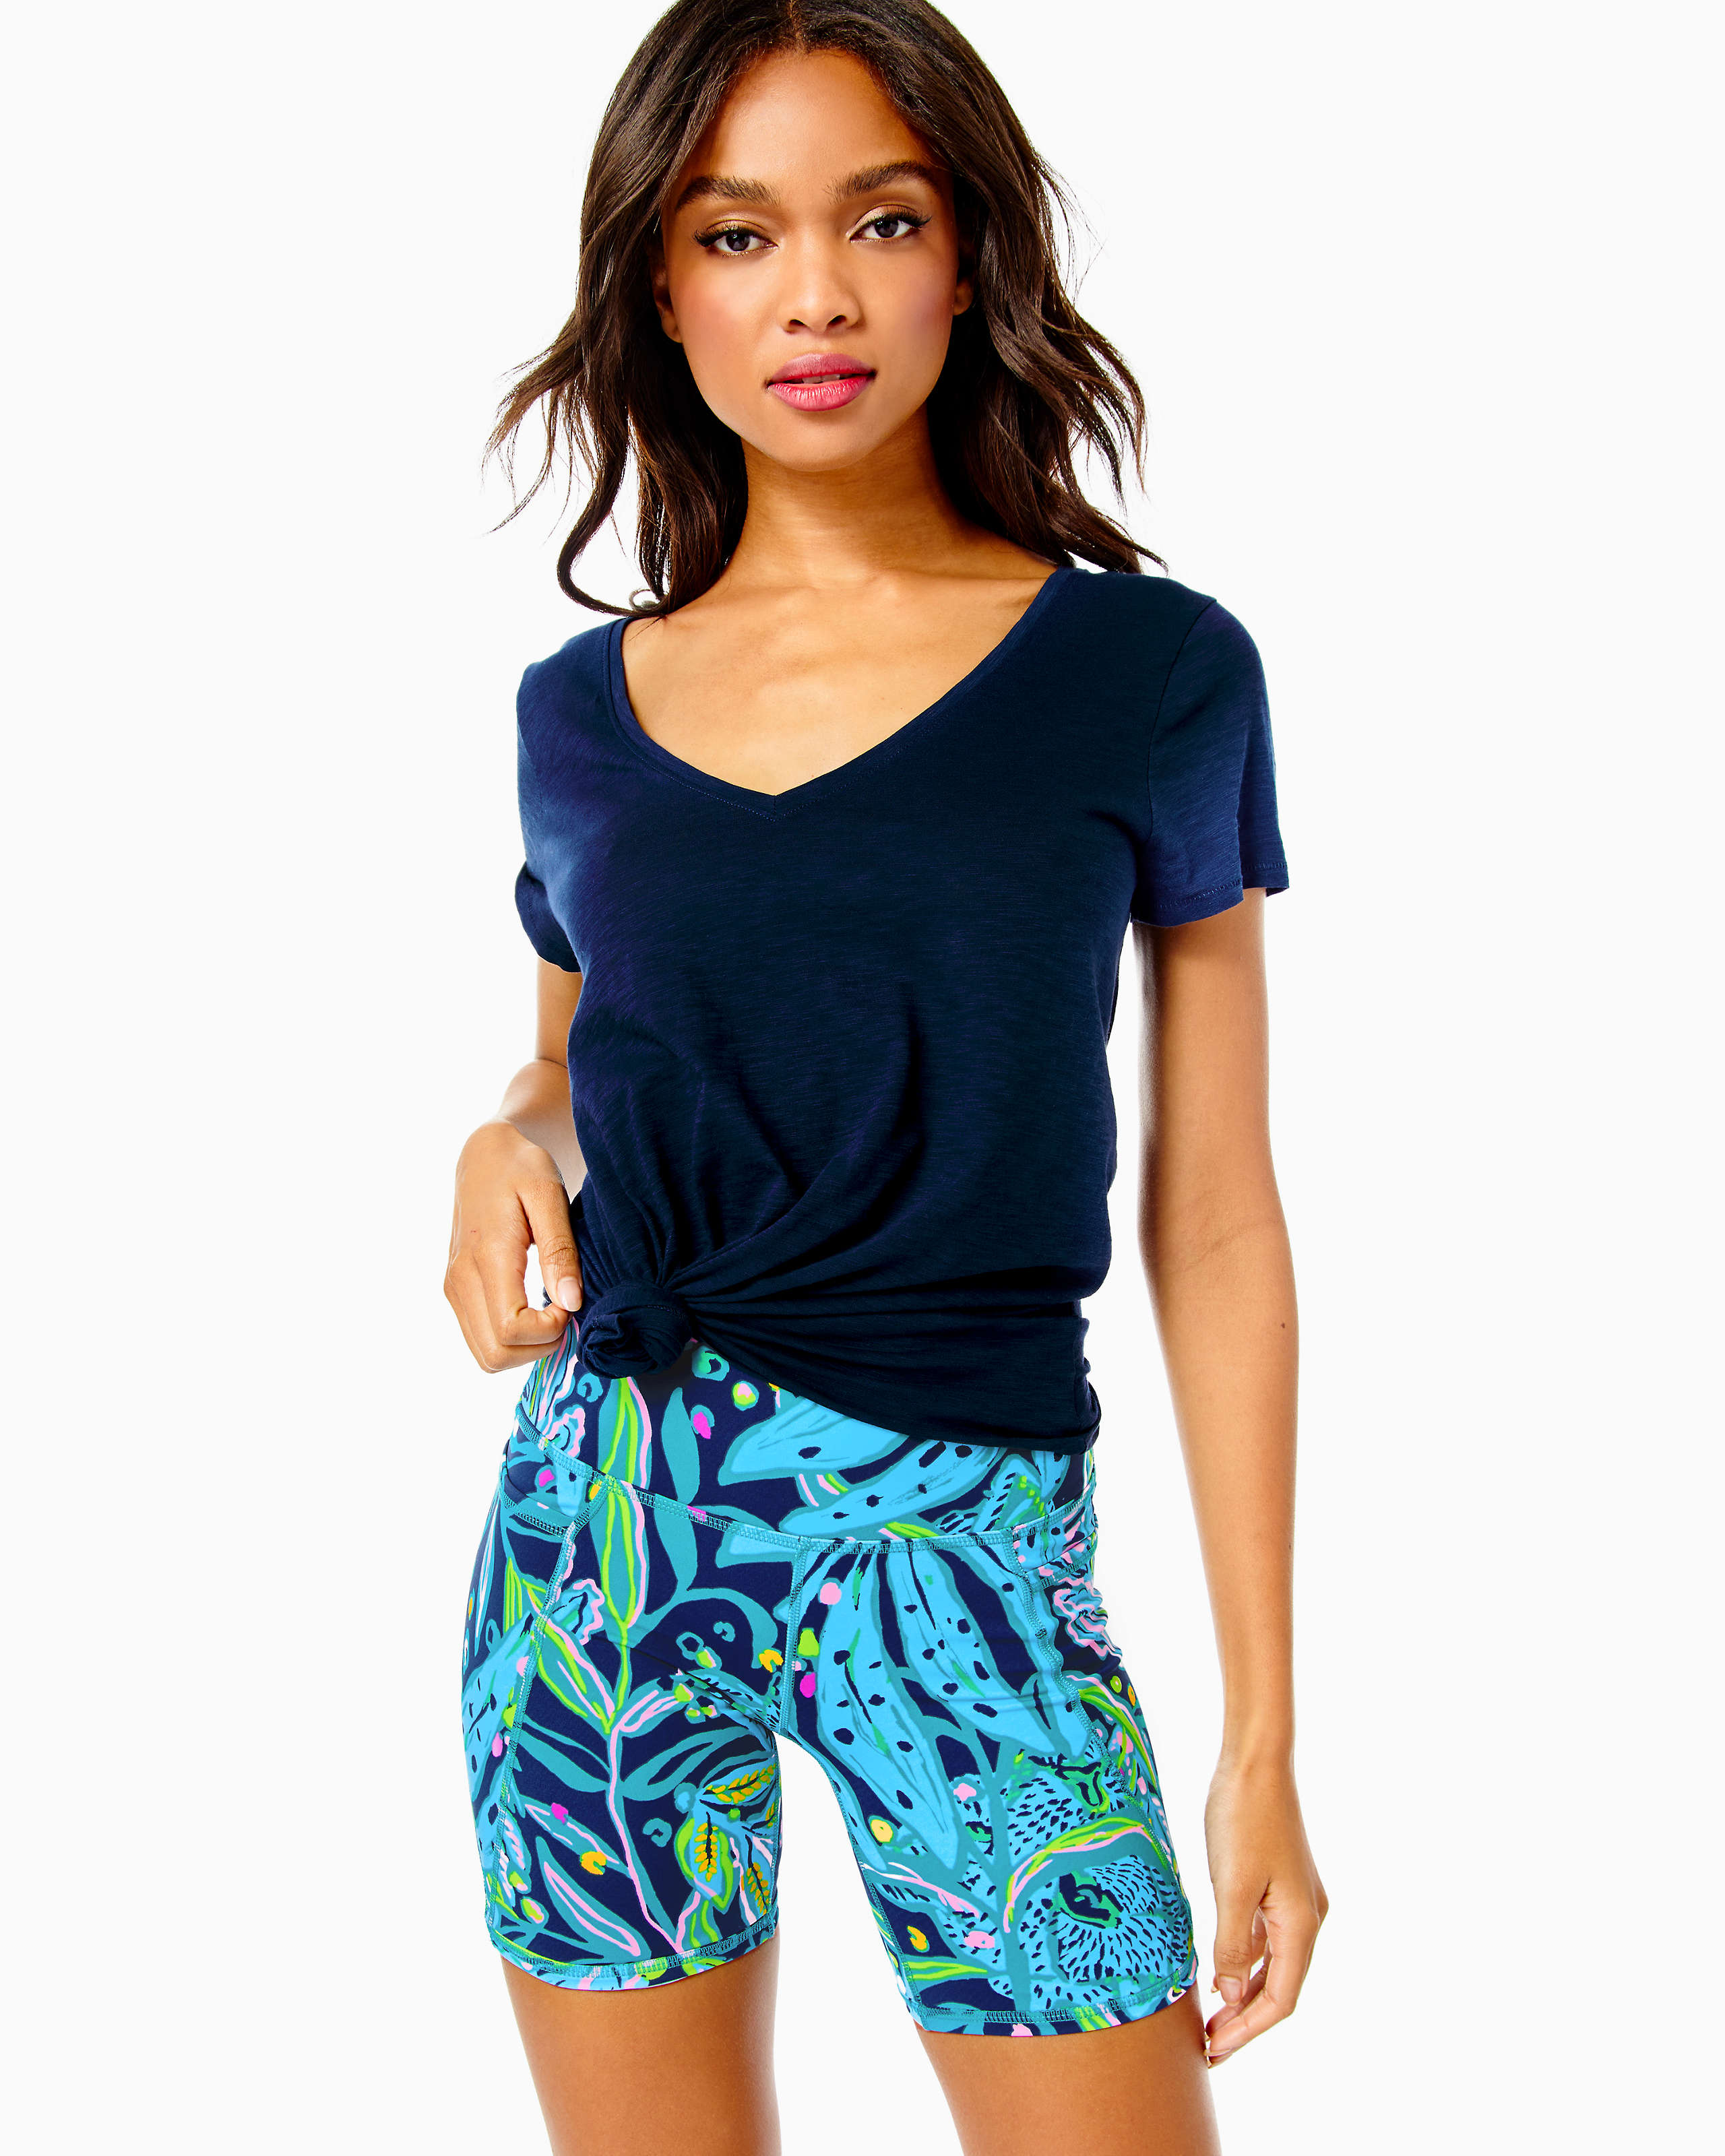 UPF 50+ Luxletic 8" South Beach High-Rise Bike Short, Low Tide Navy Catty Purrsonality, large - Lilly Pulitzer Zoomed